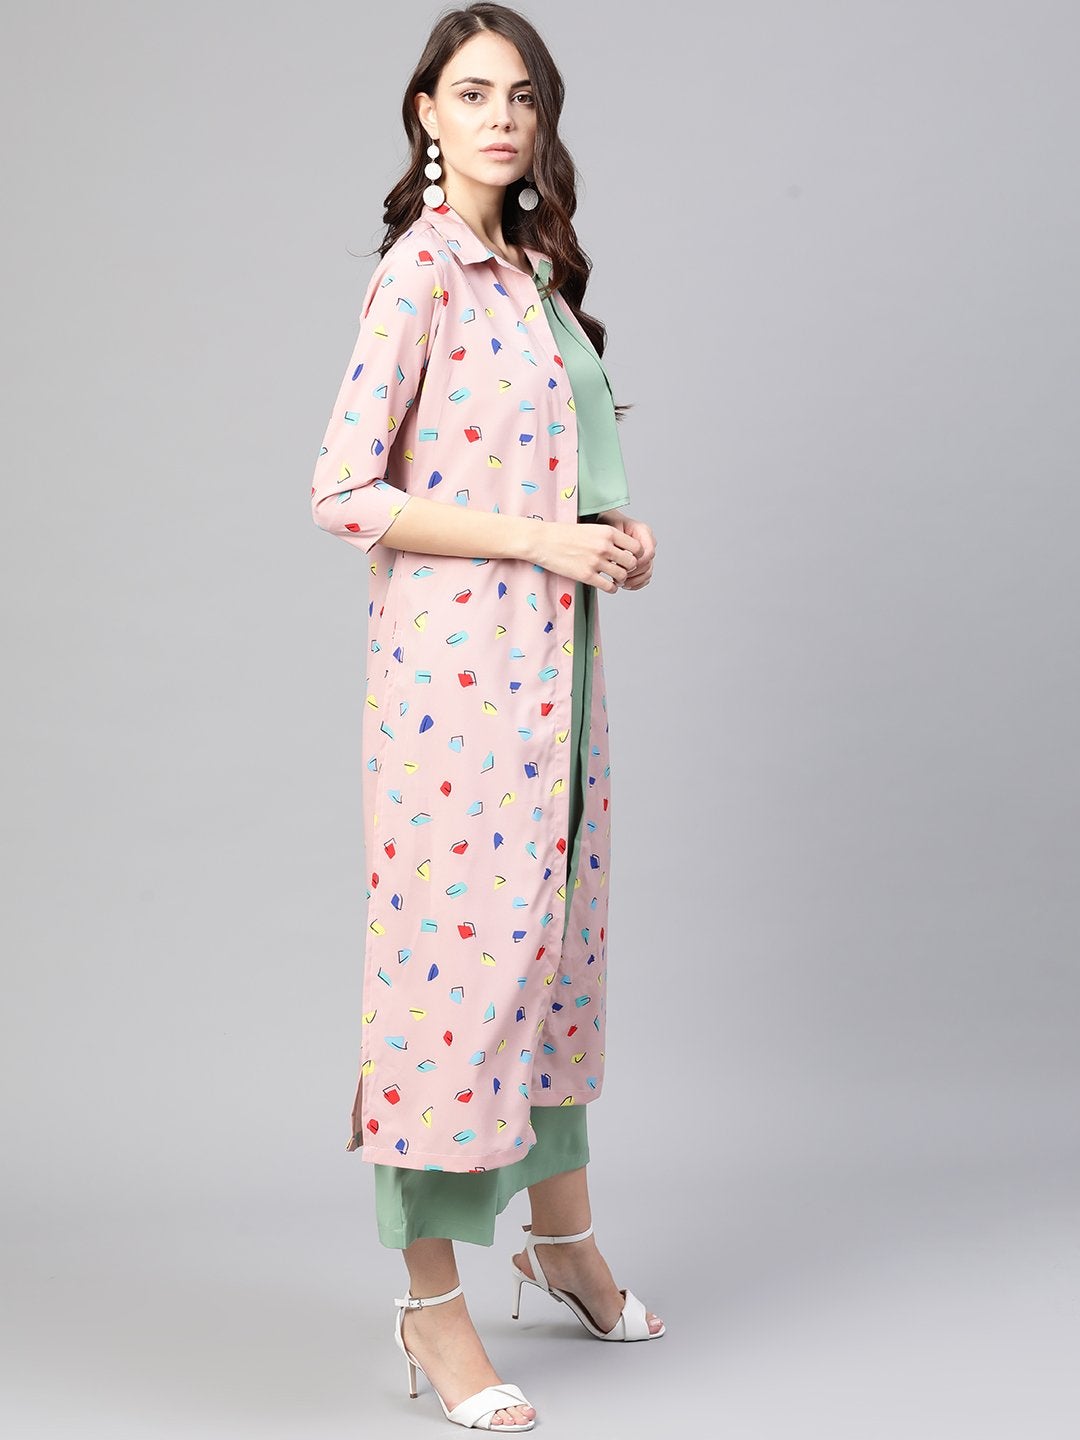 Women's Top With Pants And Printed Long Shrug - Pannkh